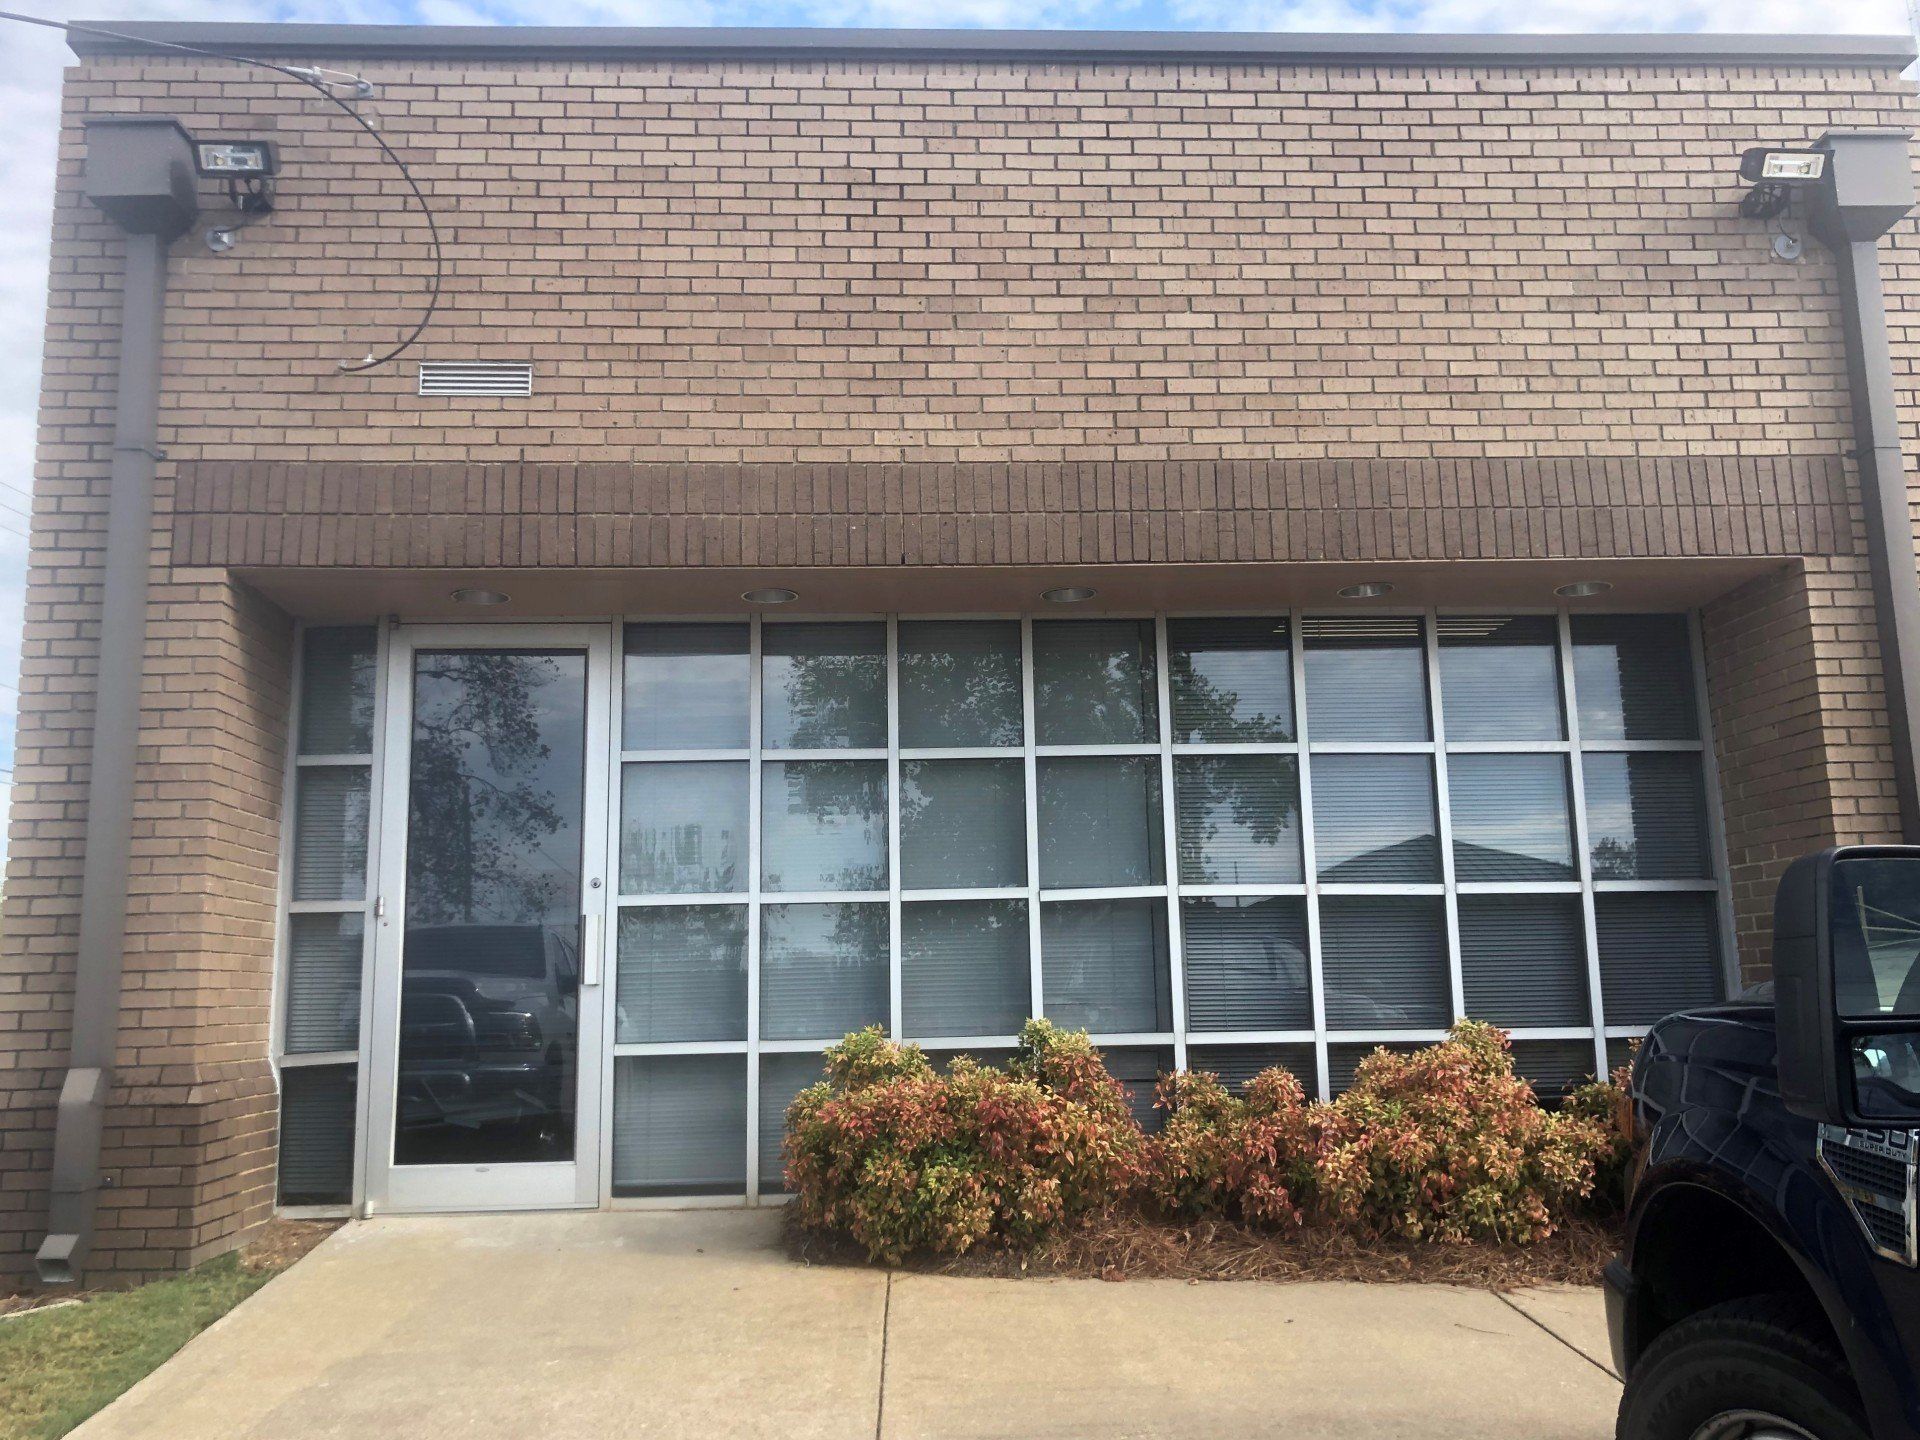 Architectural window tinting service on 10.22.2019 - Office windows were spf tinted at the Fire Department in Montgomery, Alabama